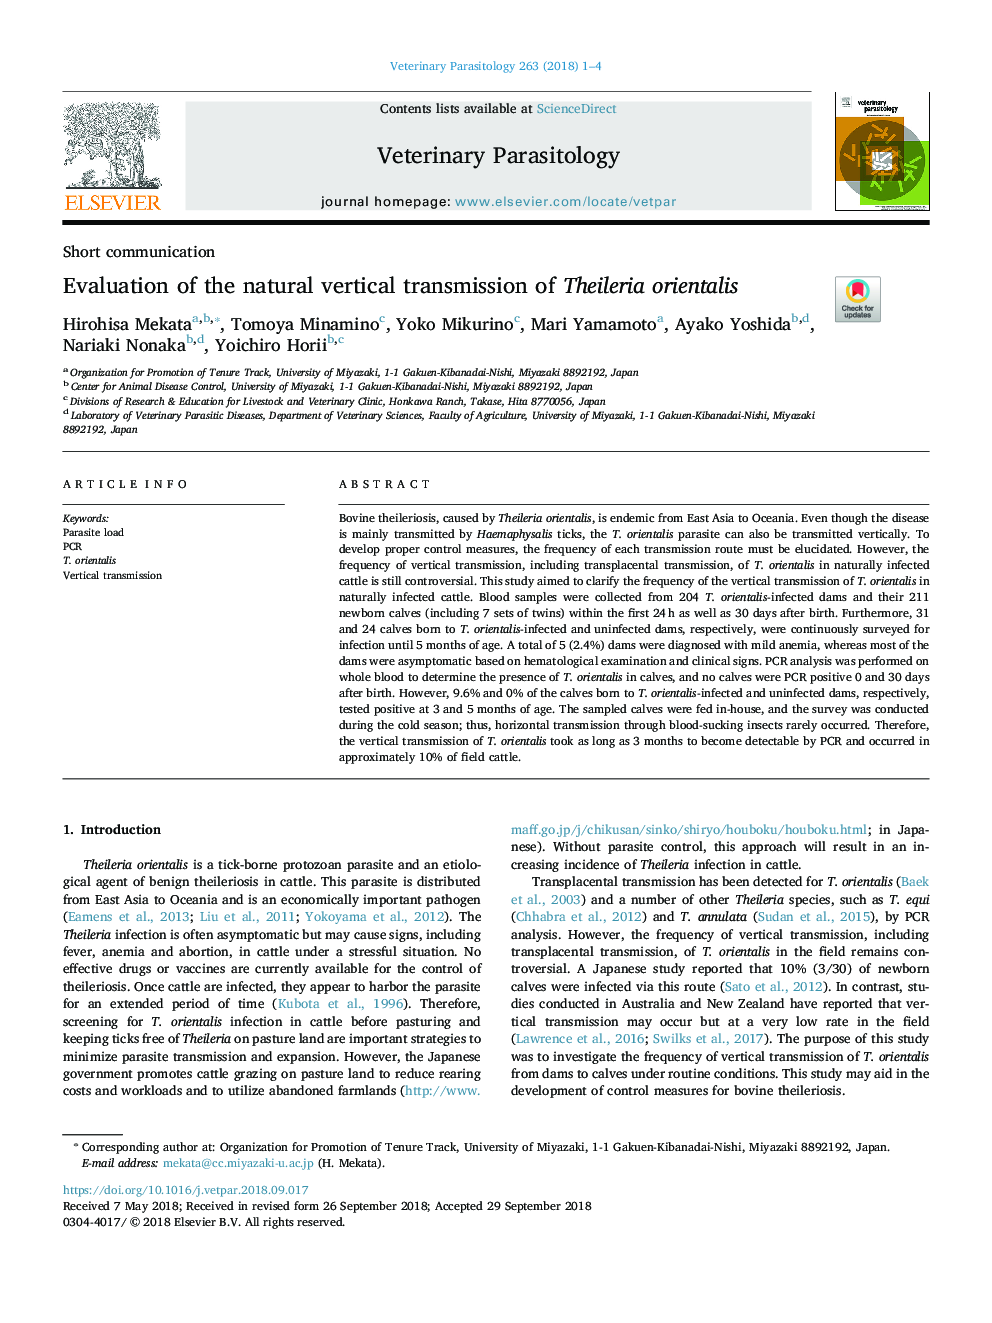 Evaluation of the natural vertical transmission of Theileria orientalis